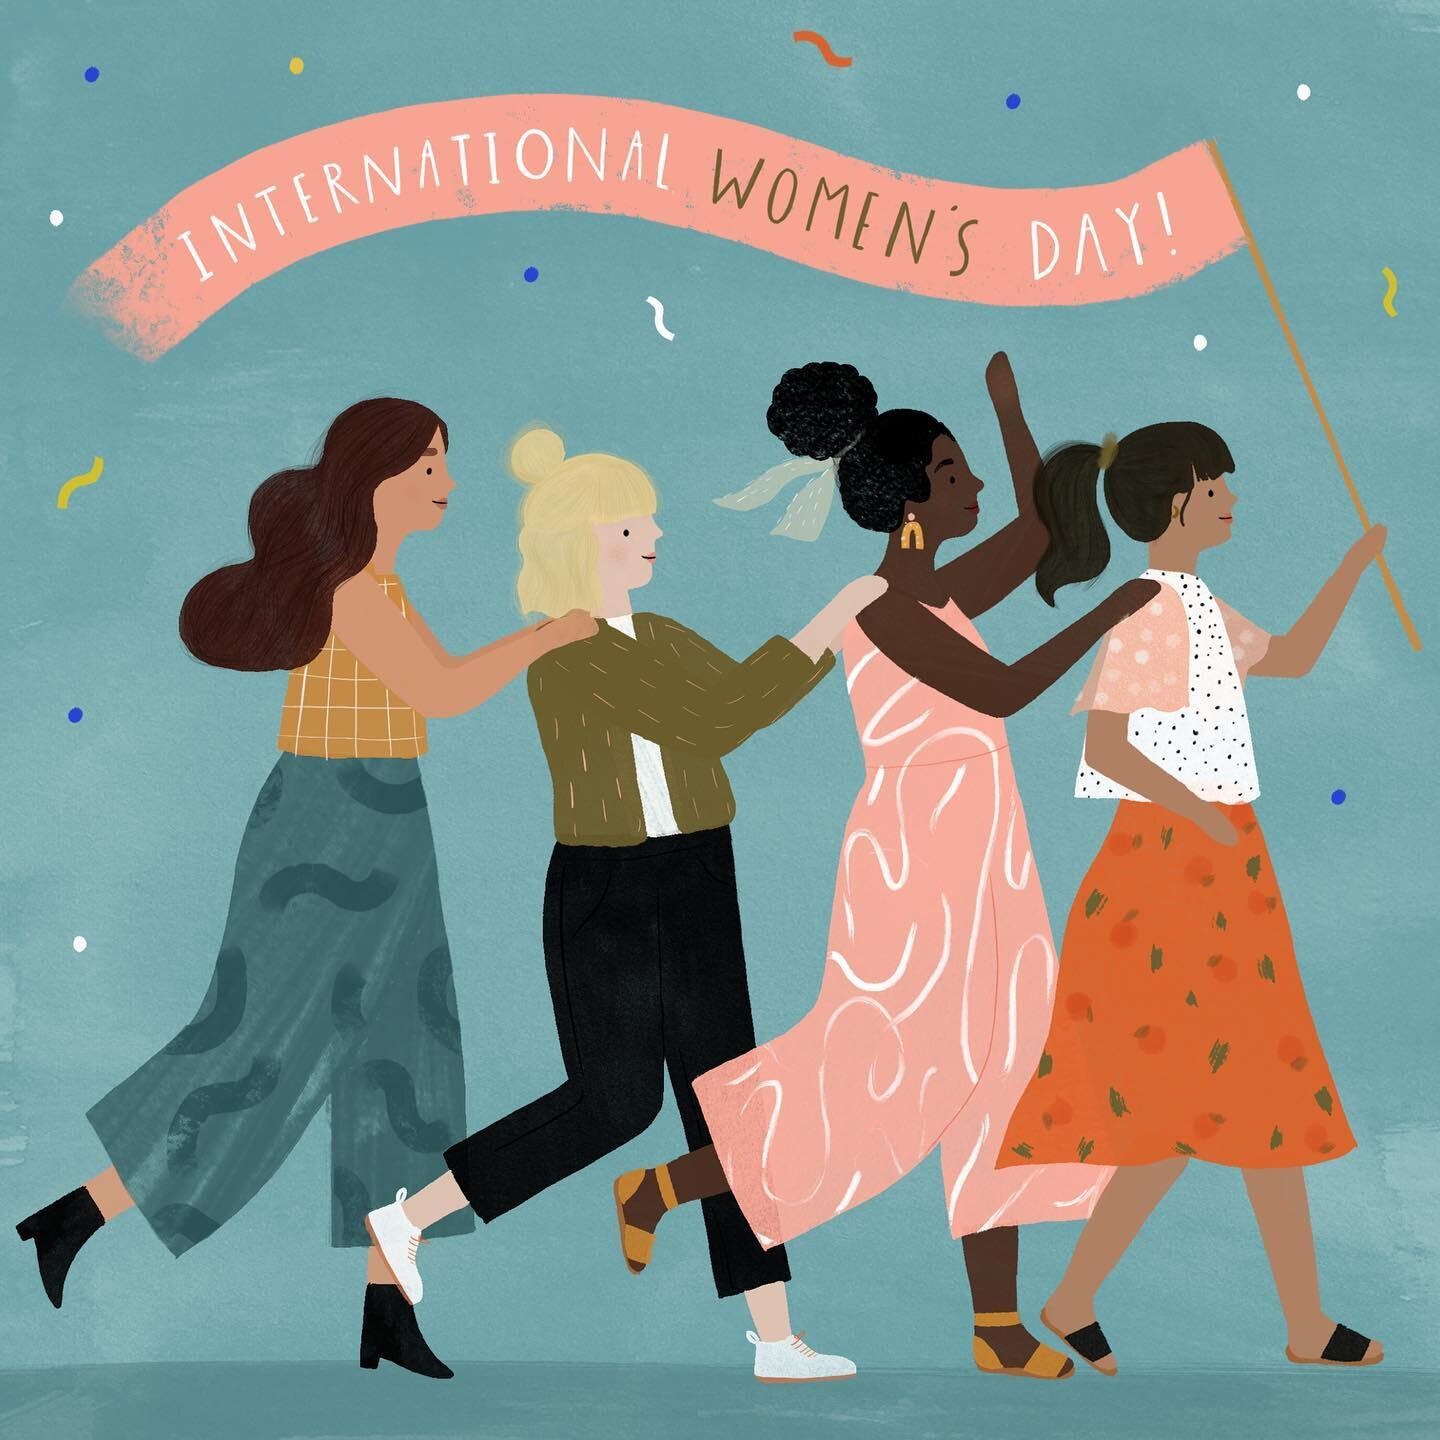 As a team full of gals, we know how talented, smart and capable women can be - something International Women&rsquo;s Day is all about celebrating!
.
In our bio you can find a link to the #iwd2021 website which has resources and details of how to get 